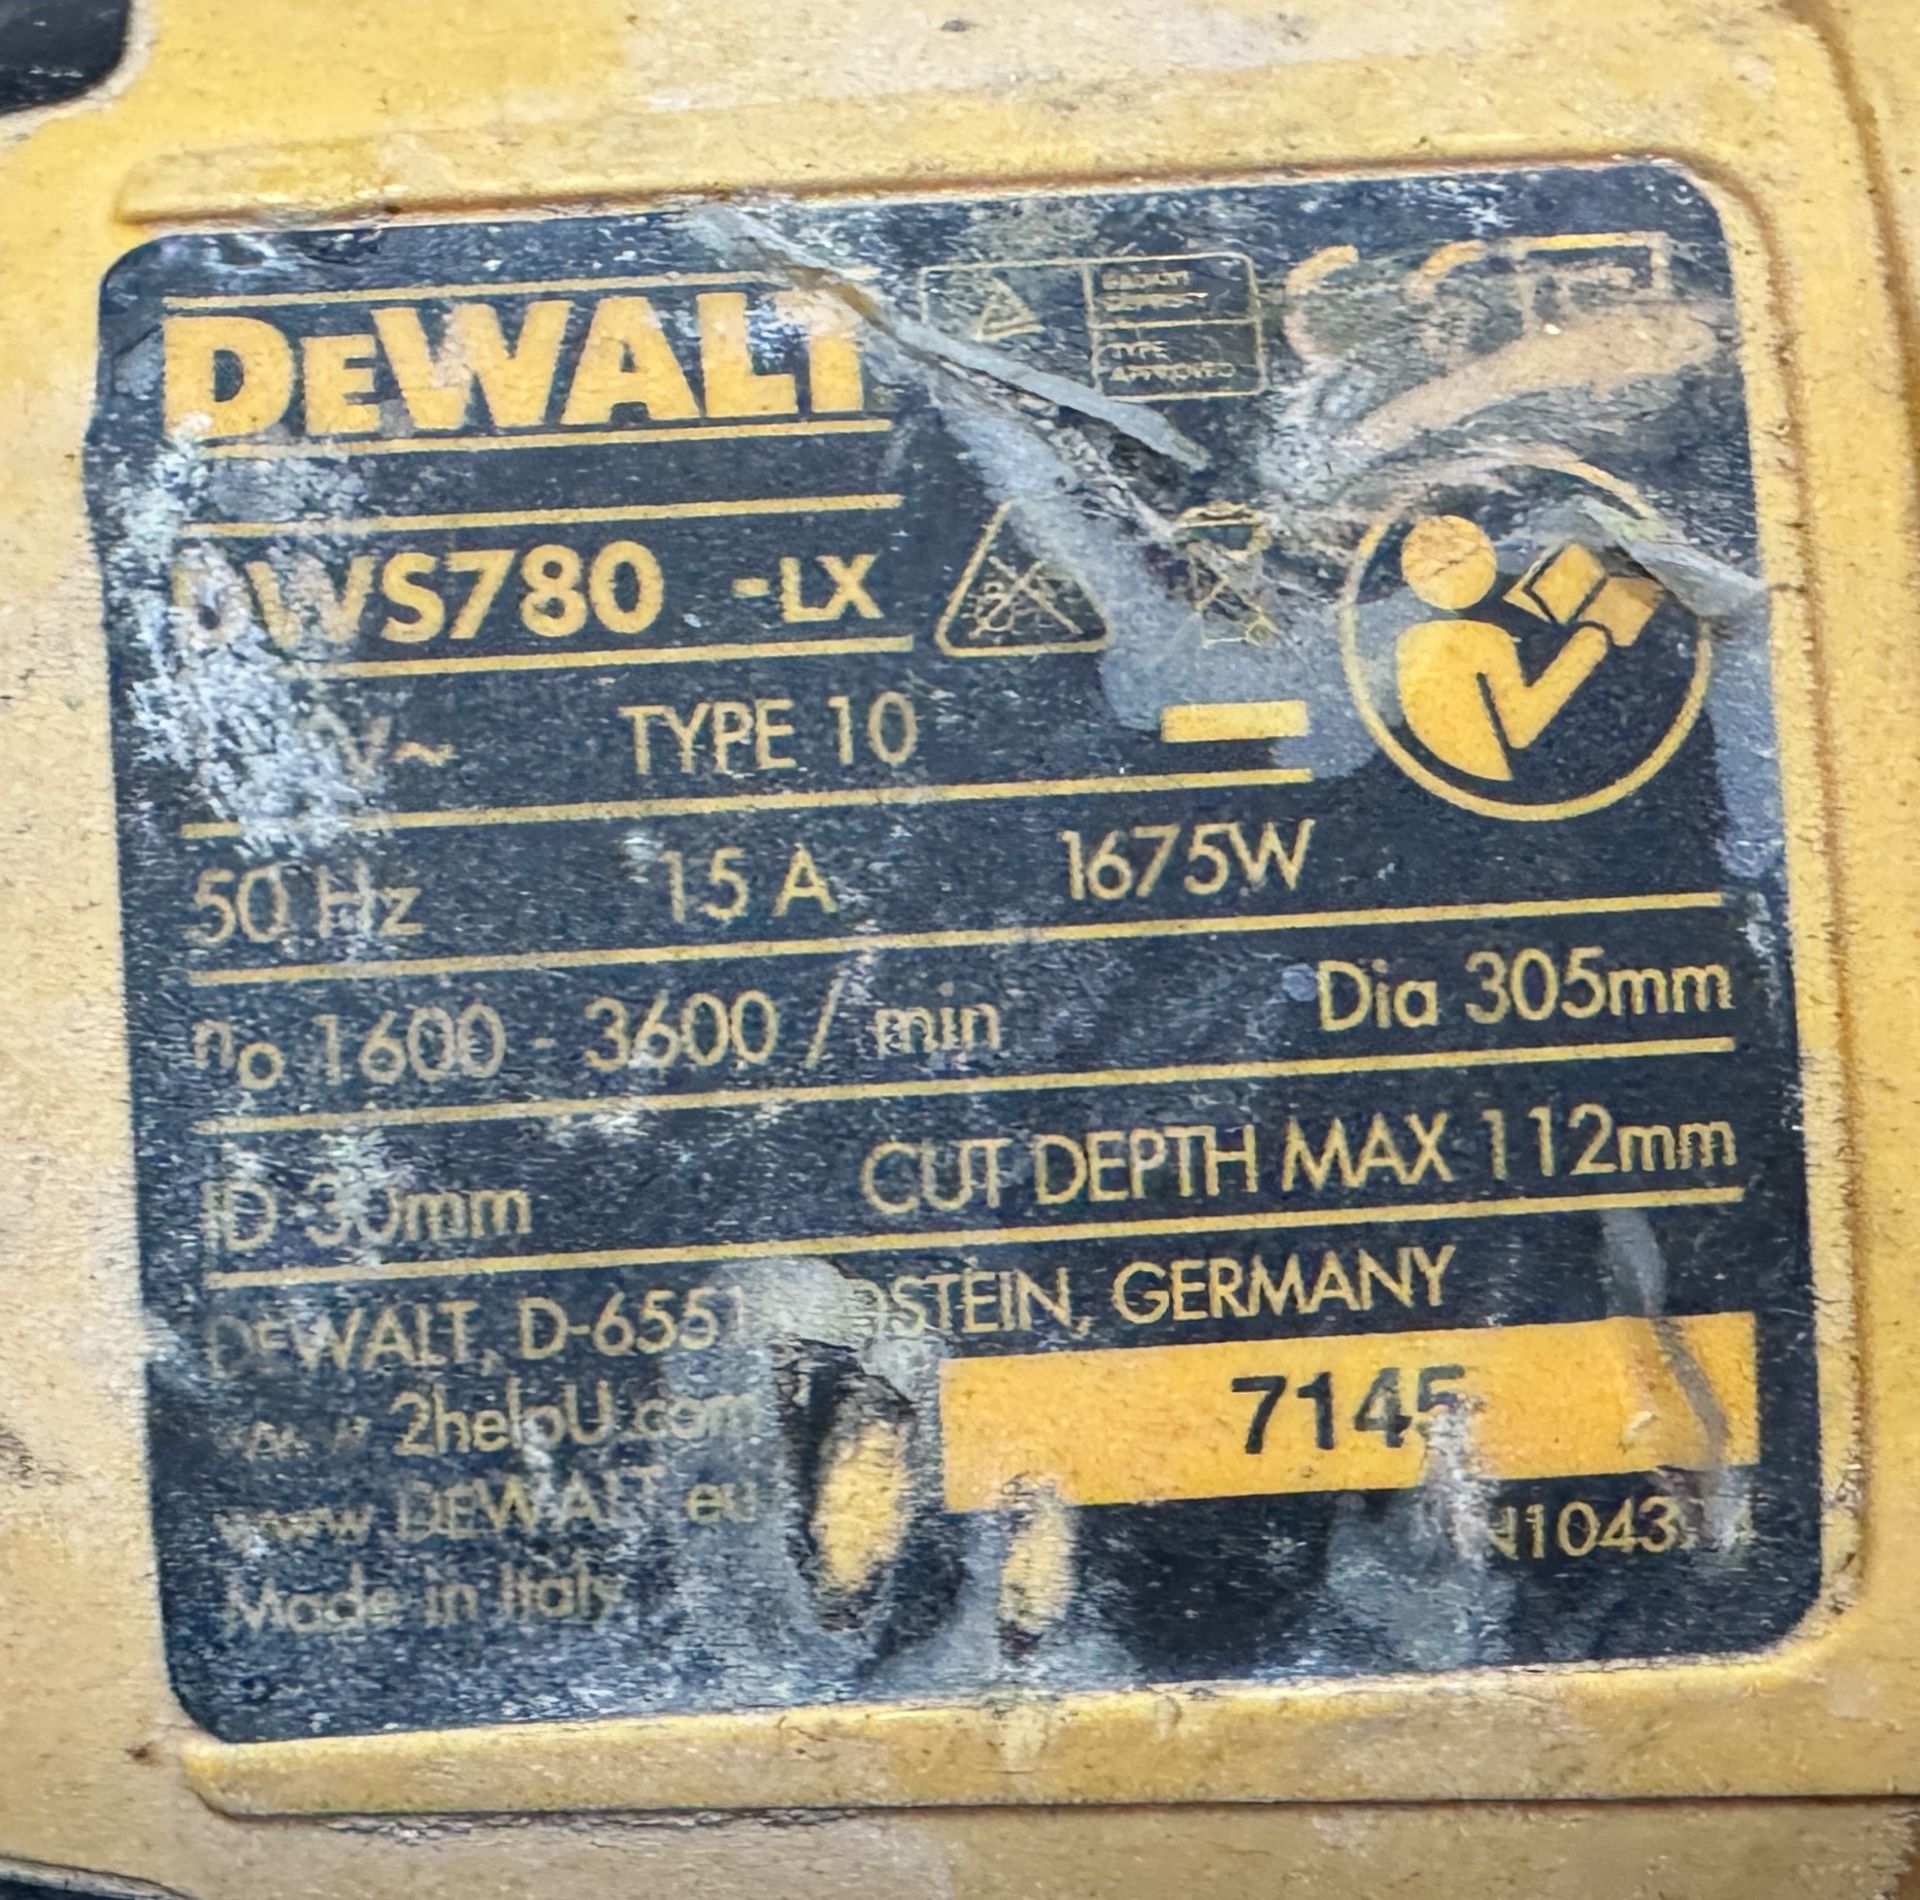 DeWalt DWS780 Cross Cut Saw, 110v (Location: Brentwood. Please Refer to General Notes) - Image 3 of 3